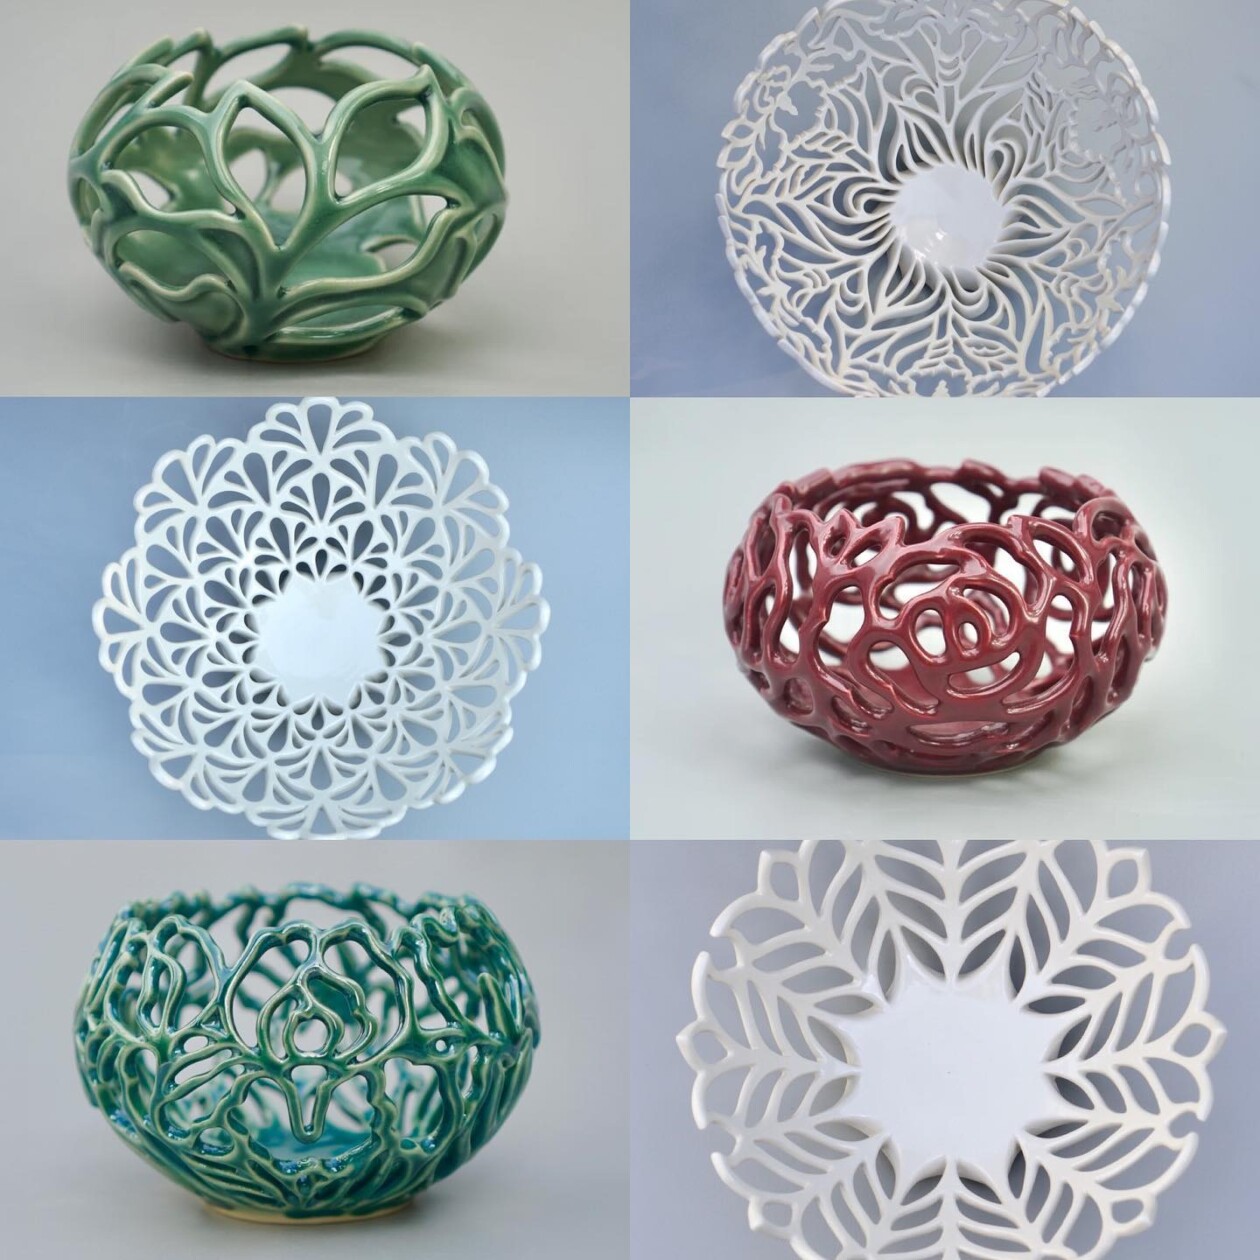 Detailed Hand Carved Porcelain Pieces By Annie Quigley (8)